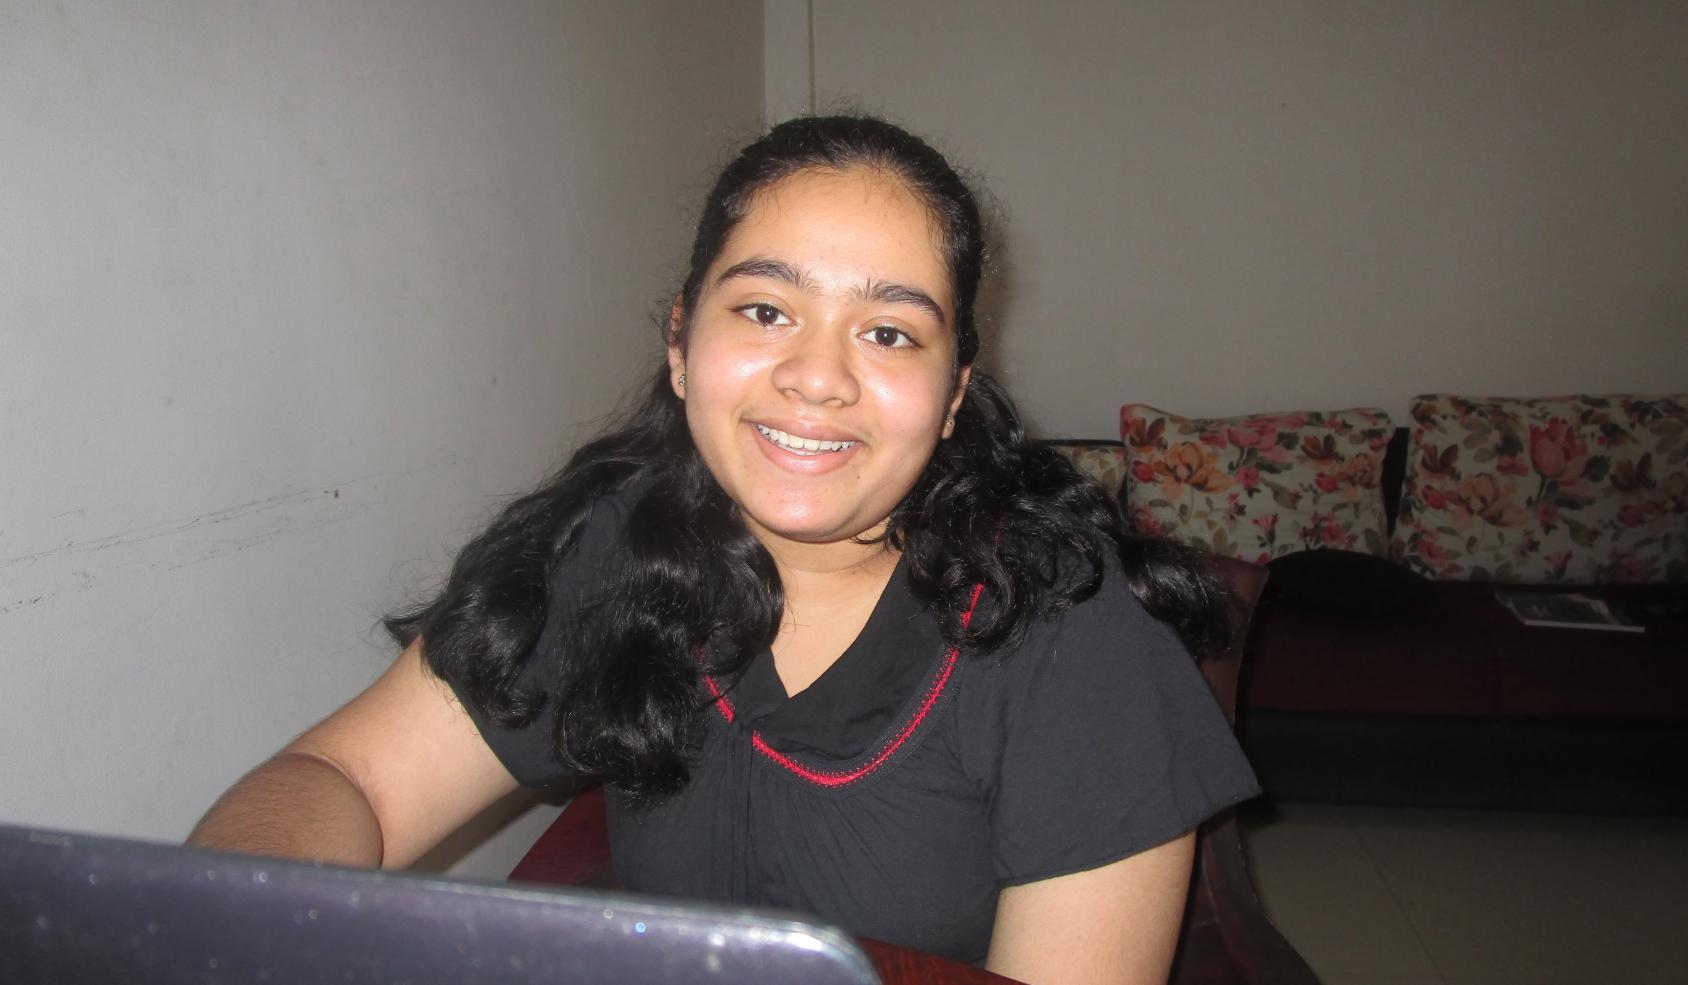 An adolescent girl sits at her computer and smiles at the camera.